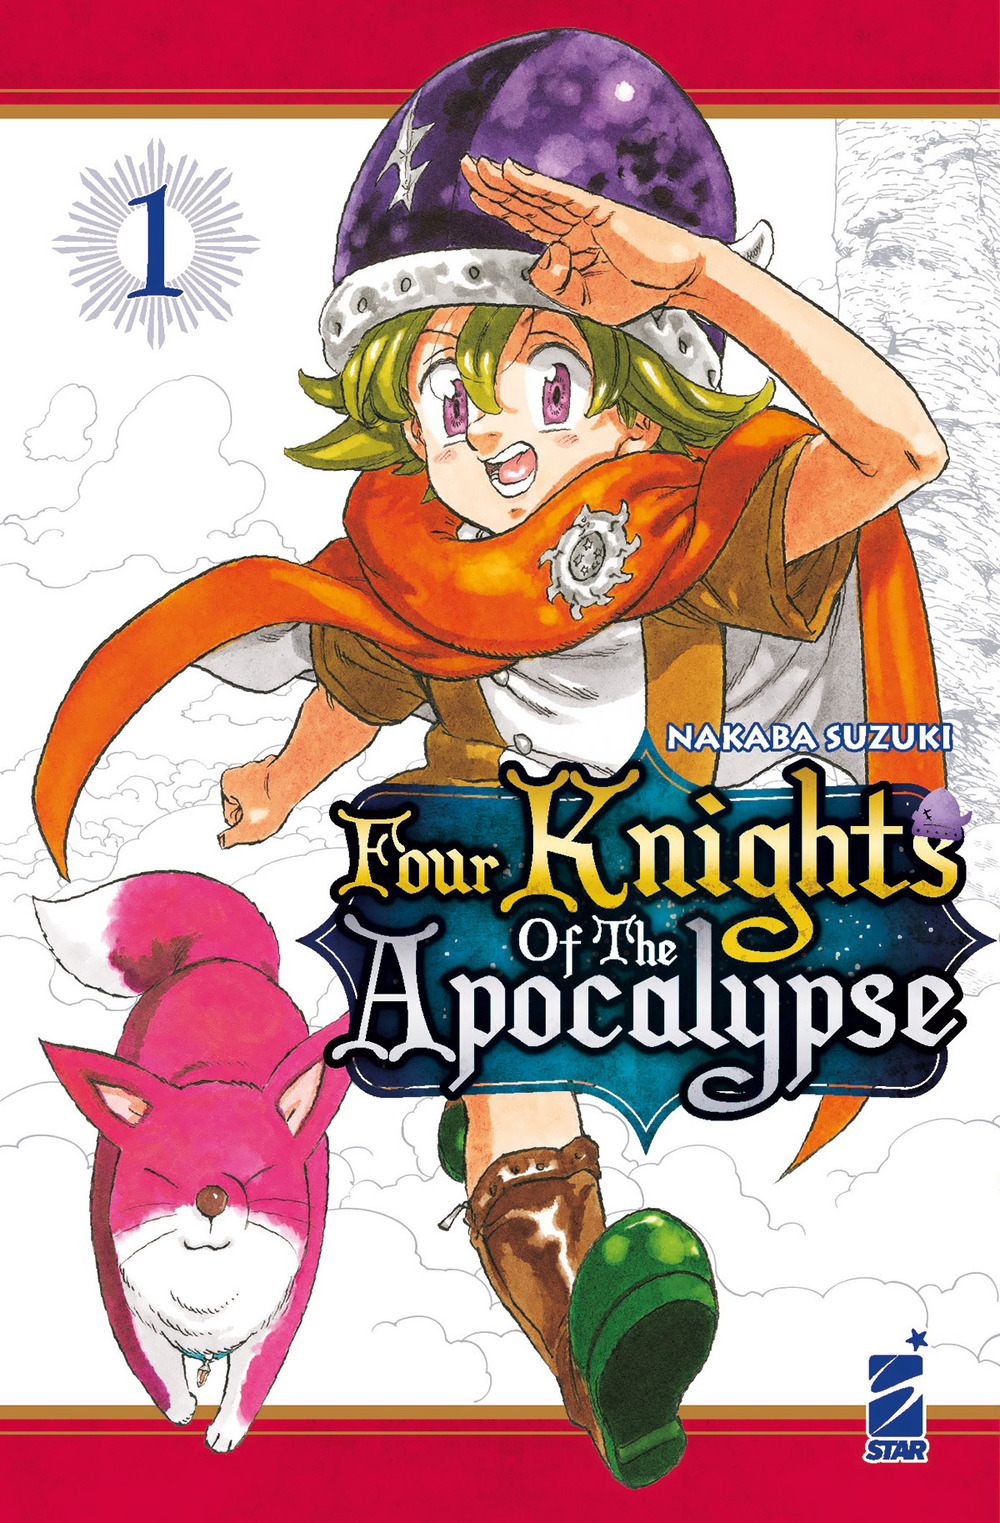 Four knights of the apocalypse. Vol. 1